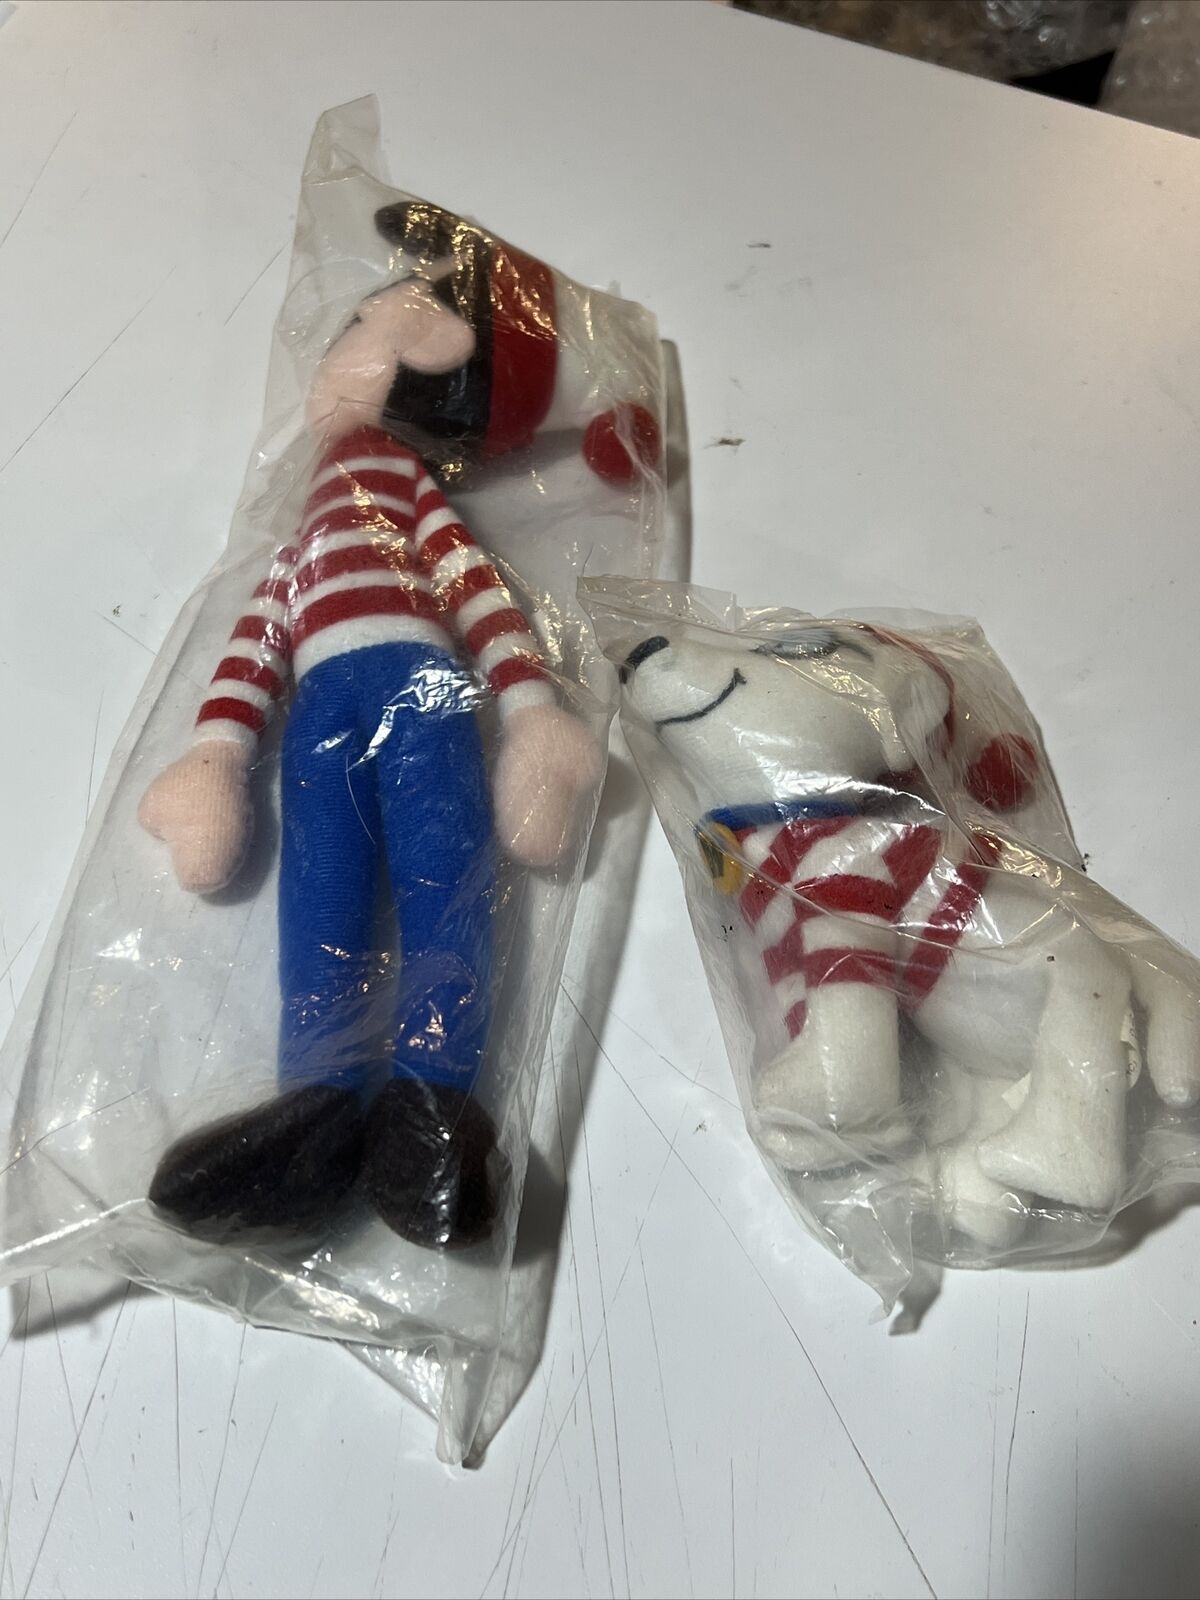 Vintage Where's Waldo And Woof The Dog Plush Doll 1997 Quaker Oats Sealed